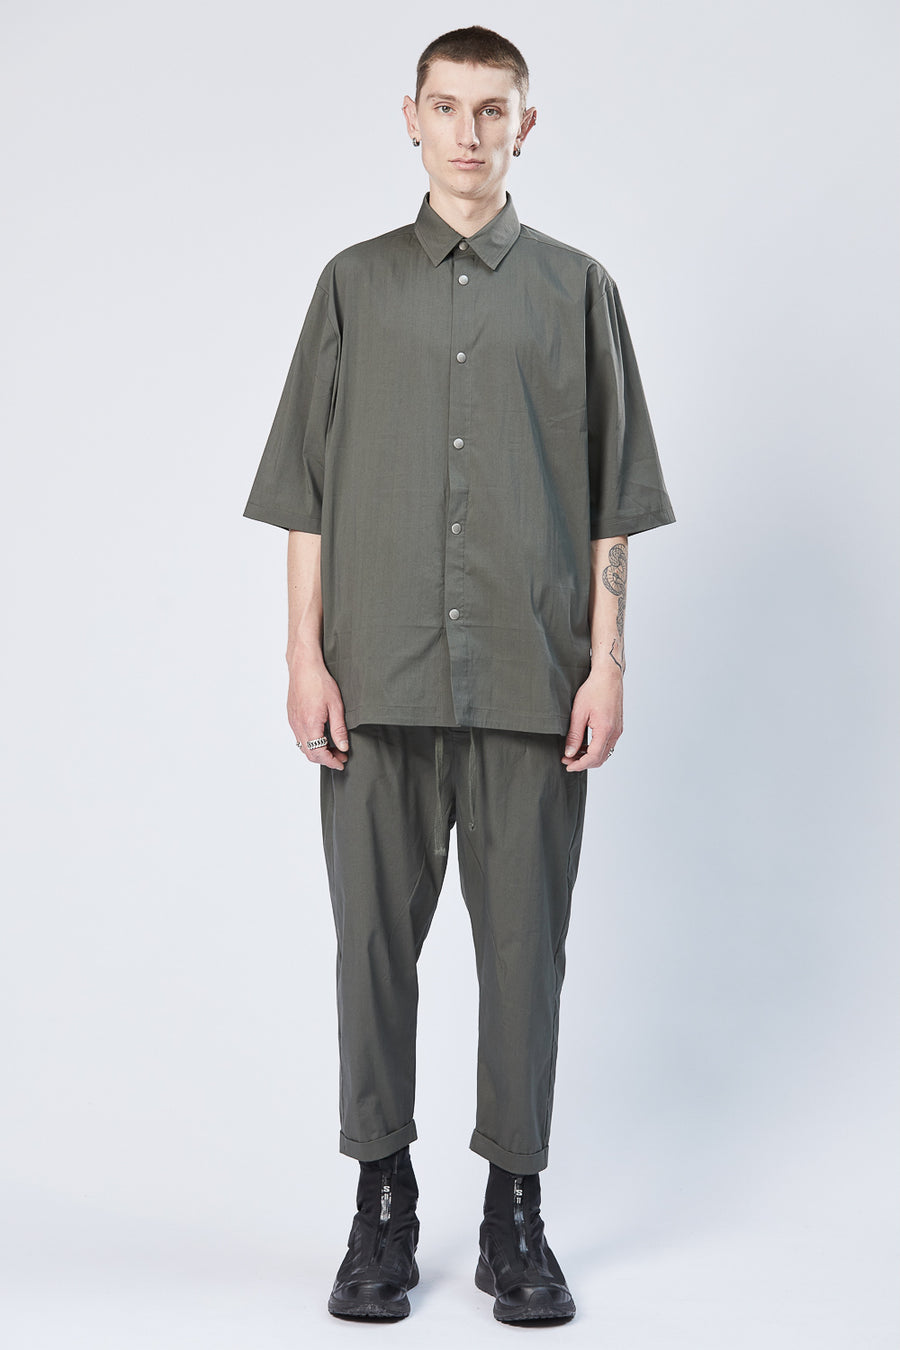 Buy the Thom Krom M H 145 Shirt in Green at Intro. Spend £50 for free UK delivery. Official stockists. We ship worldwide.